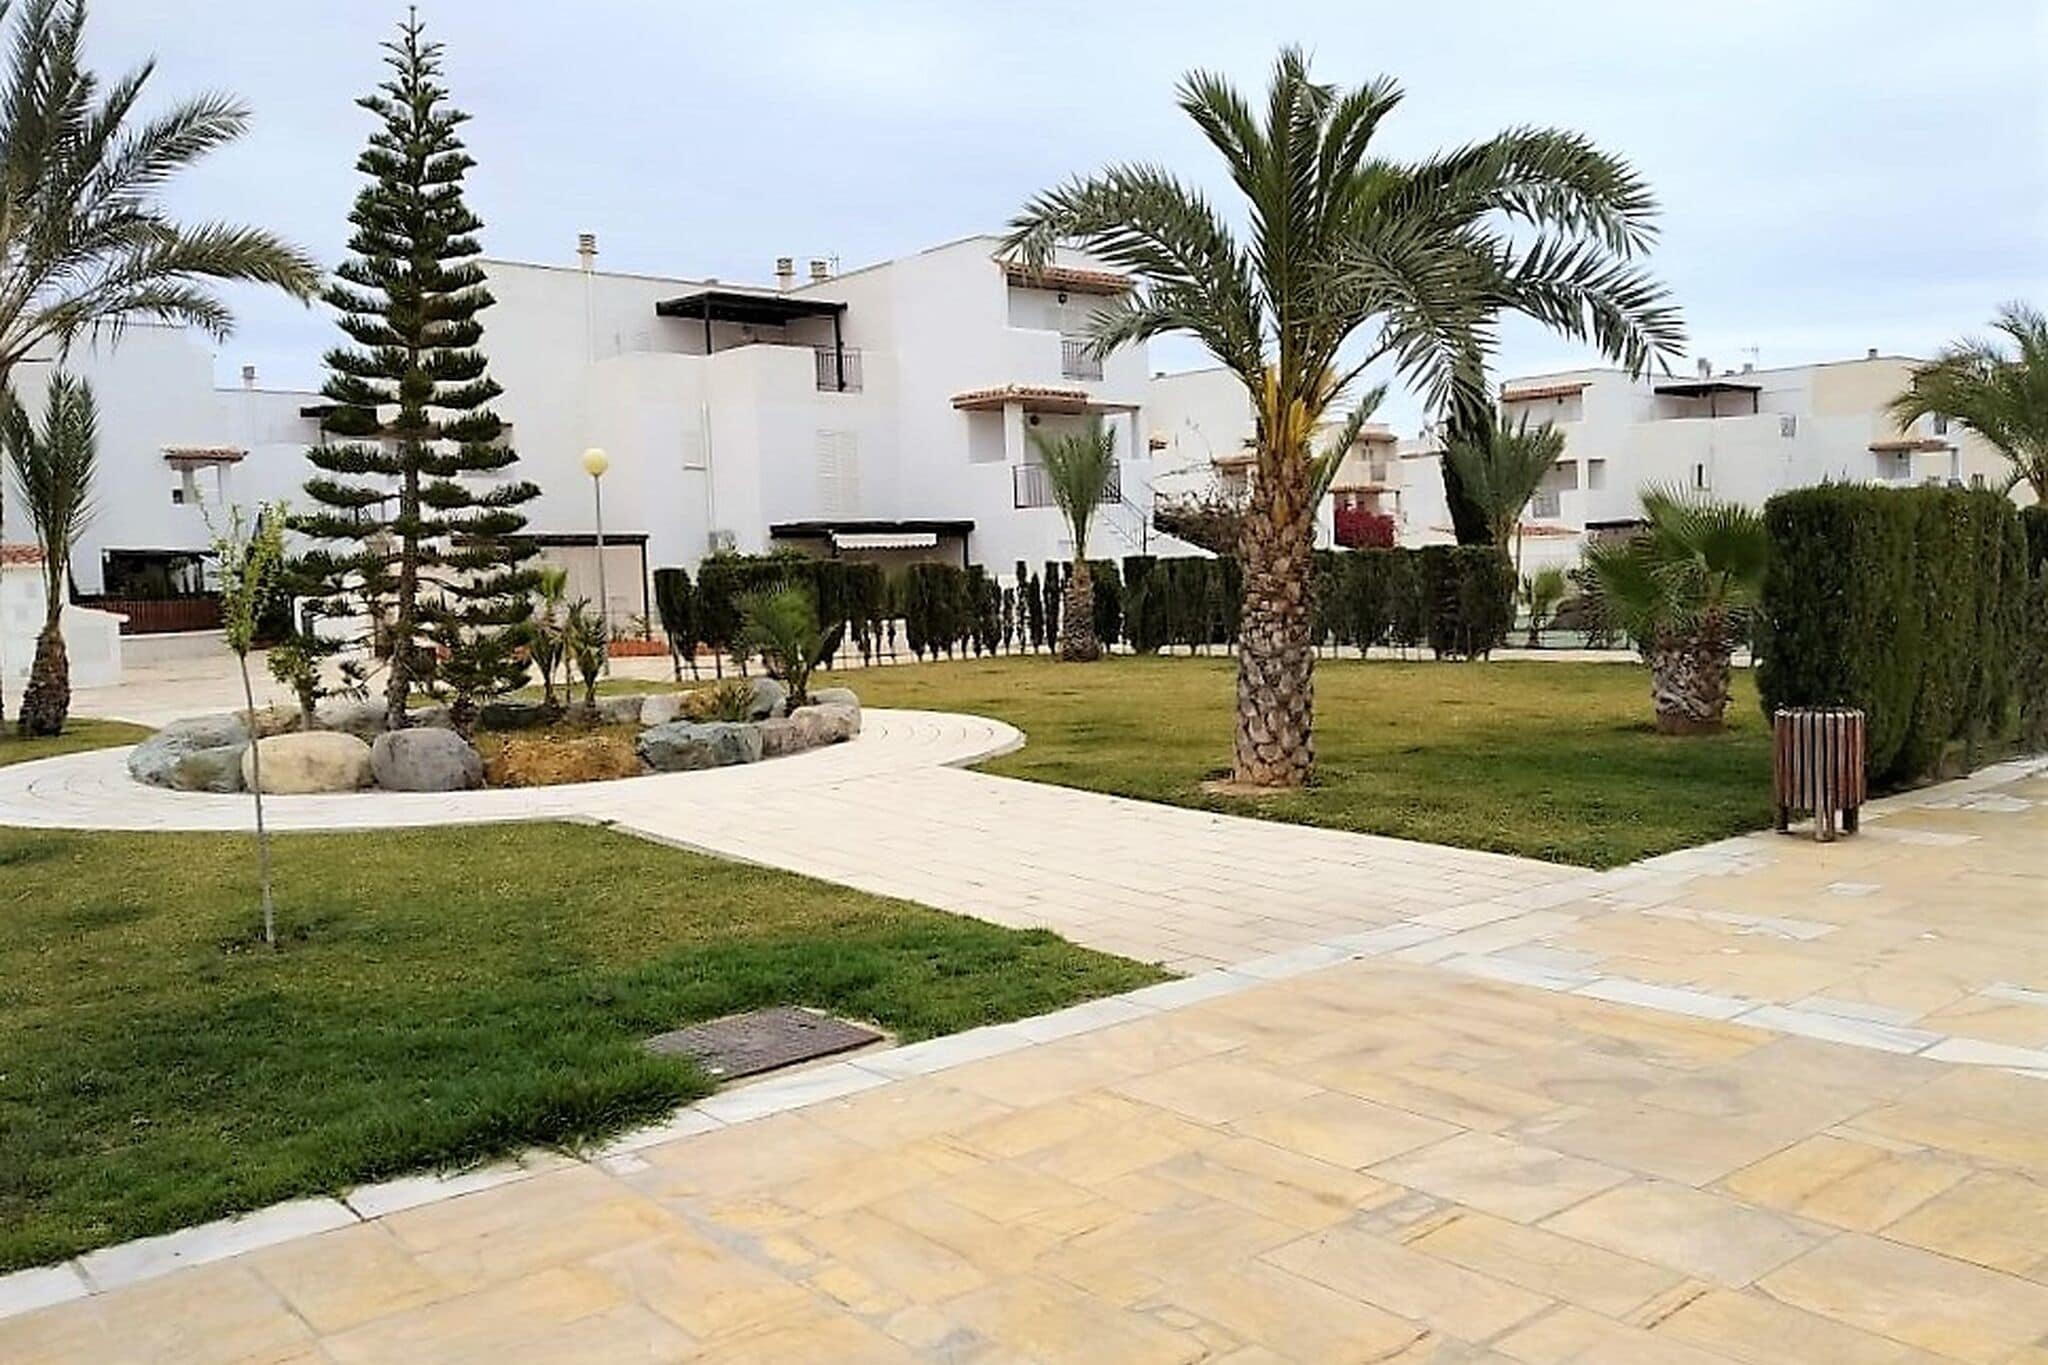 Duplex in Urb Naturista, with patio, swimming pools and access to naturist beach